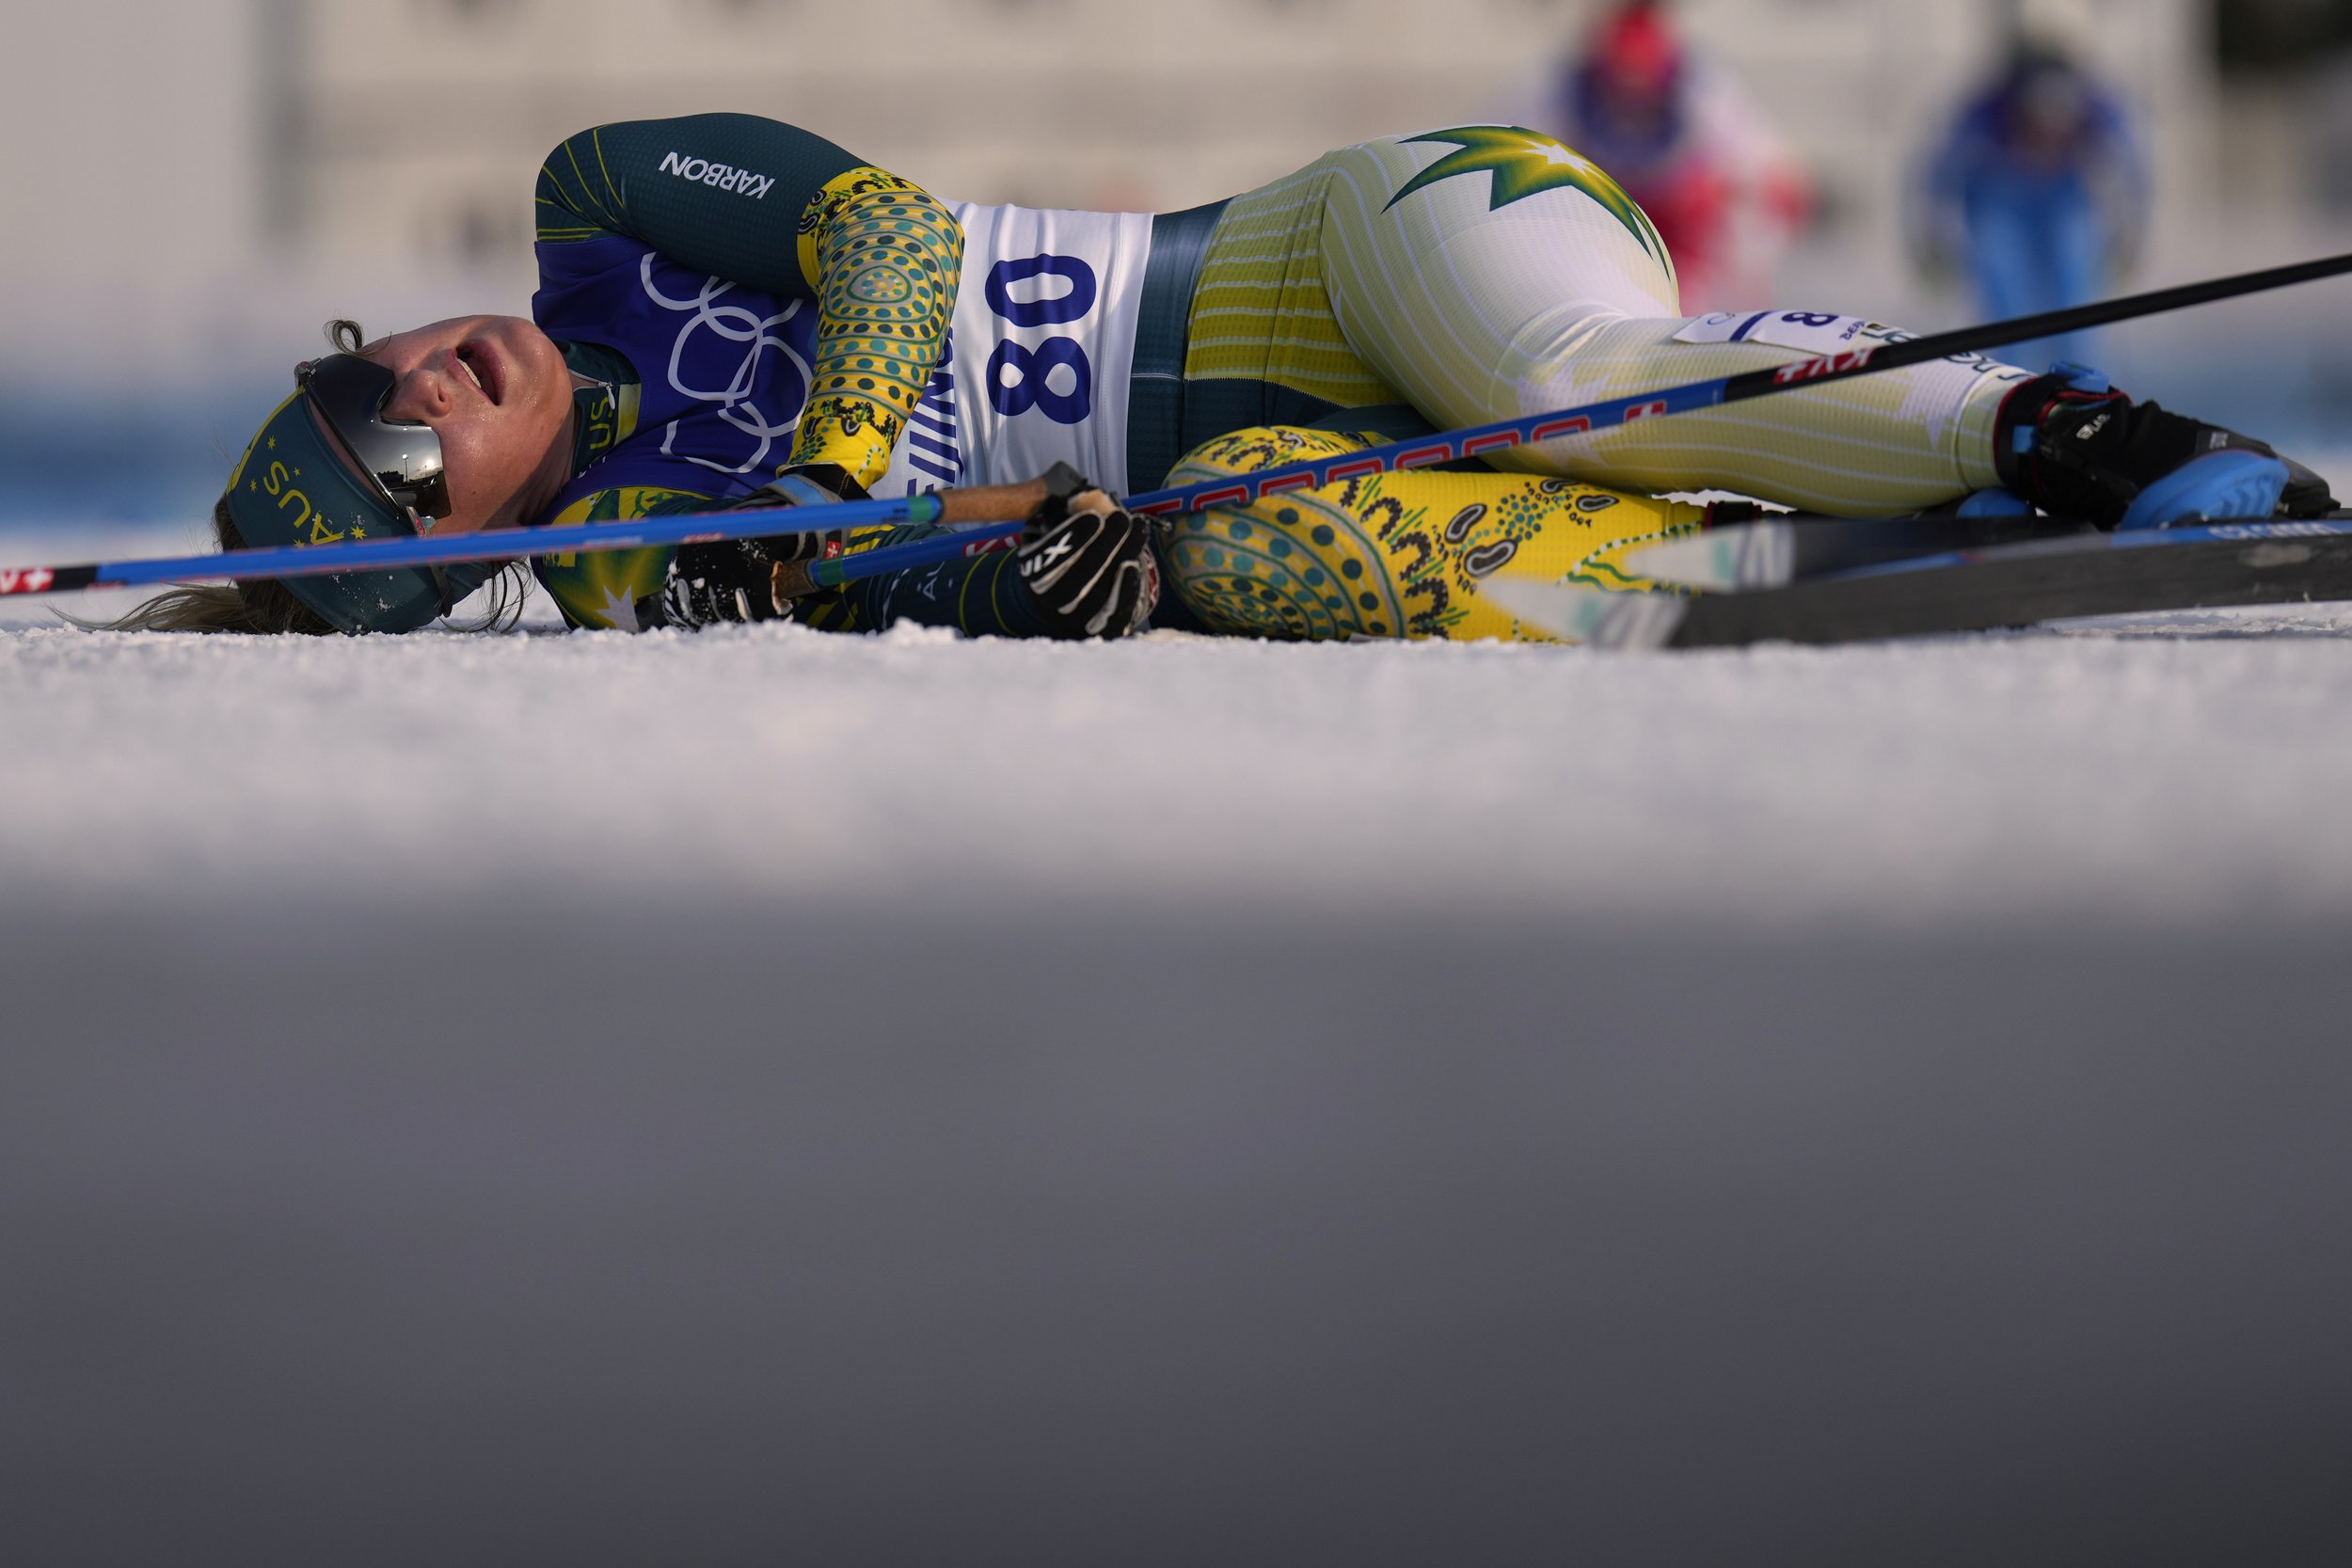  Australia's Casey Wright reacts after finishing the women's 10km classic cross-country skiing competition at the 2022 Winter Olympics, Thursday, Feb. 10, 2022, in Zhangjiakou, China. (AP Photo/Alessandra Tarantino) 